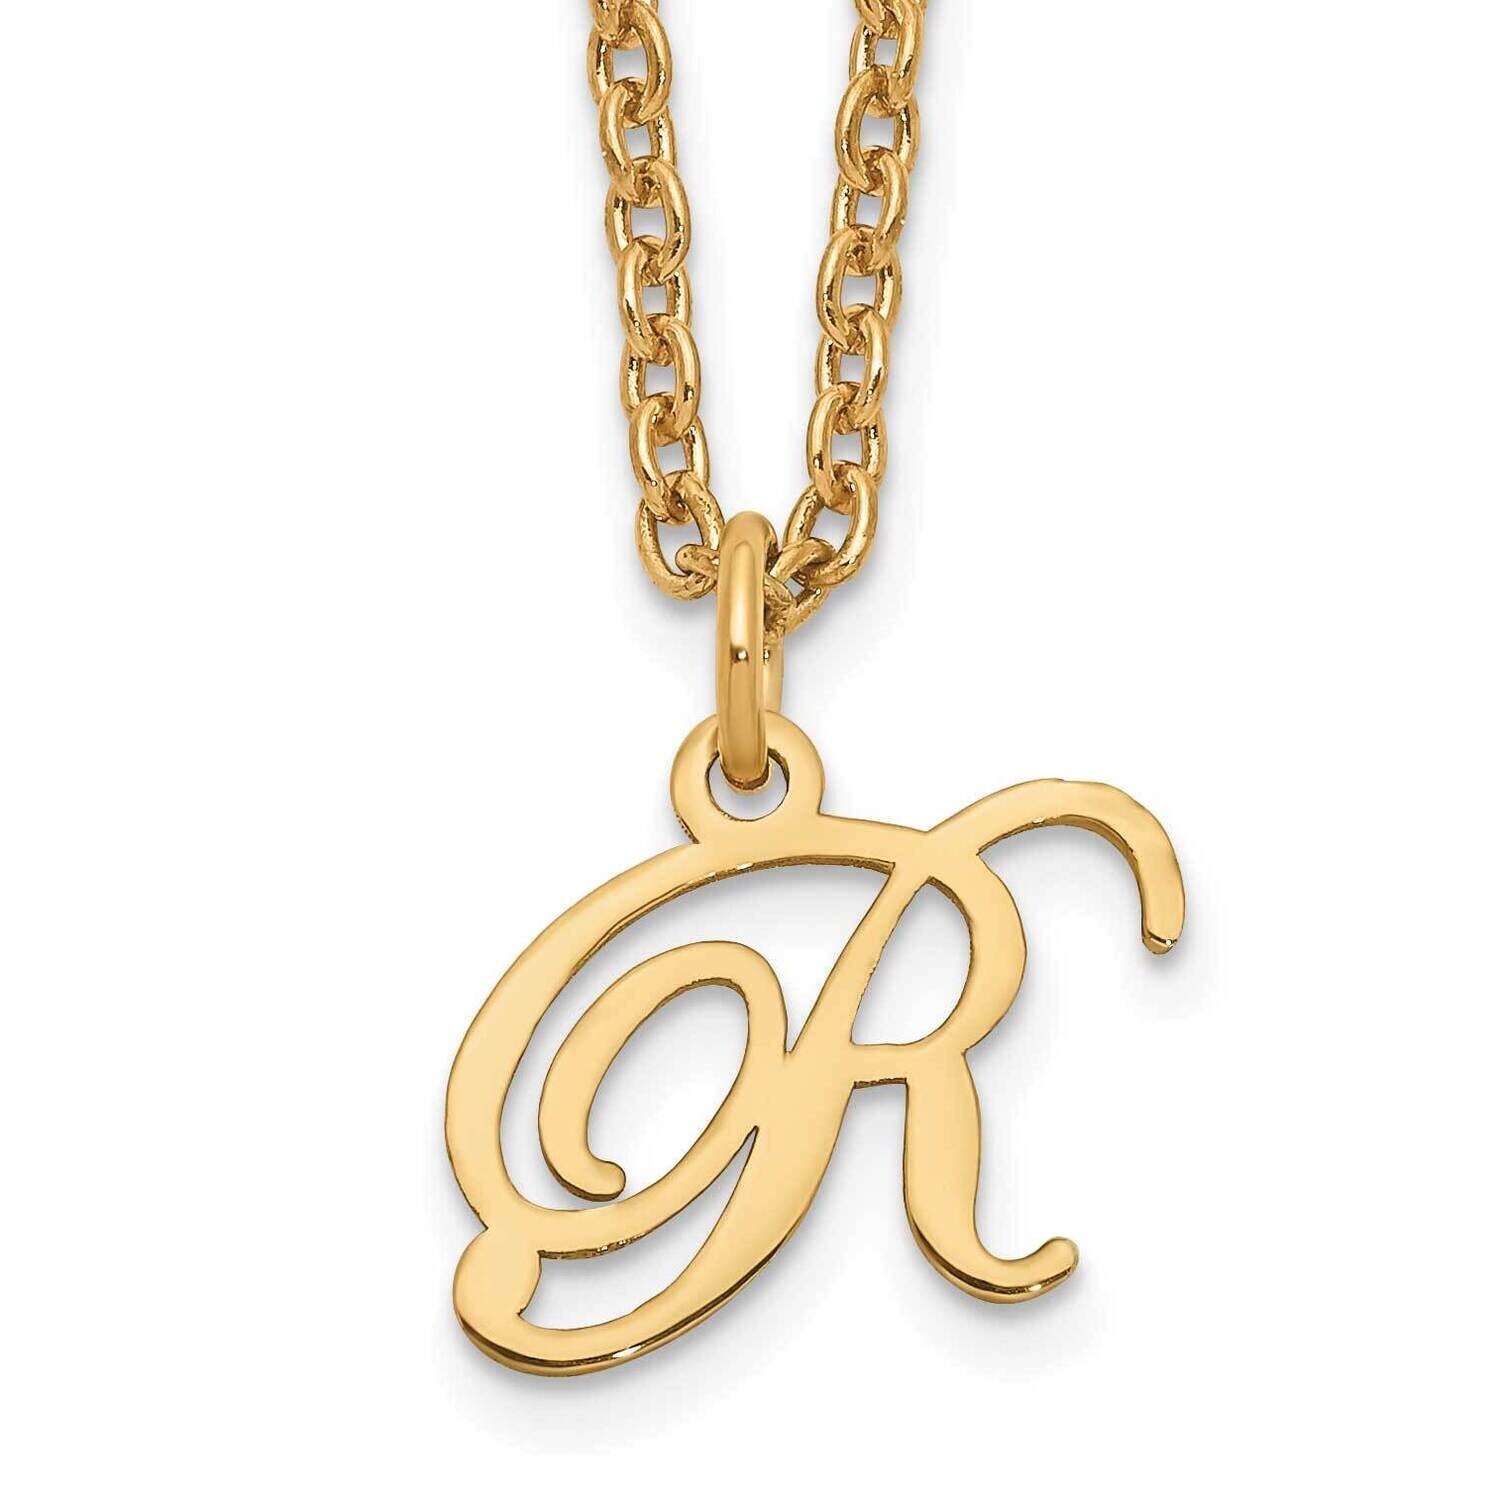 Gold-Plated Letter R Initial Necklace Sterling Silver XNA756GP/R